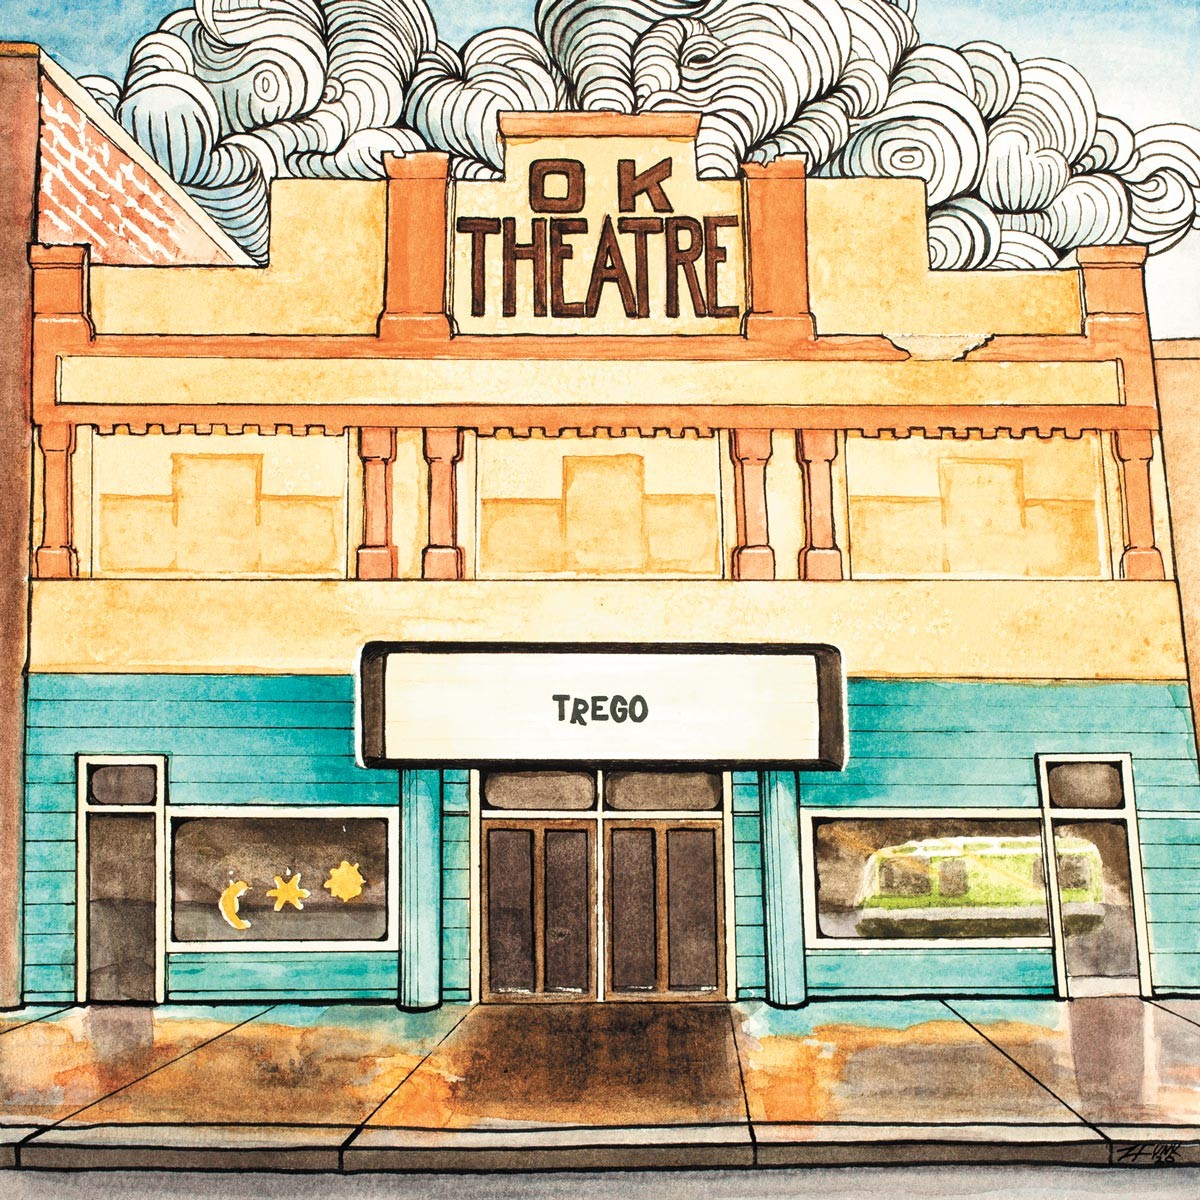 After pandemic delay, local Americana act Trego finally gets to release its new album and play live